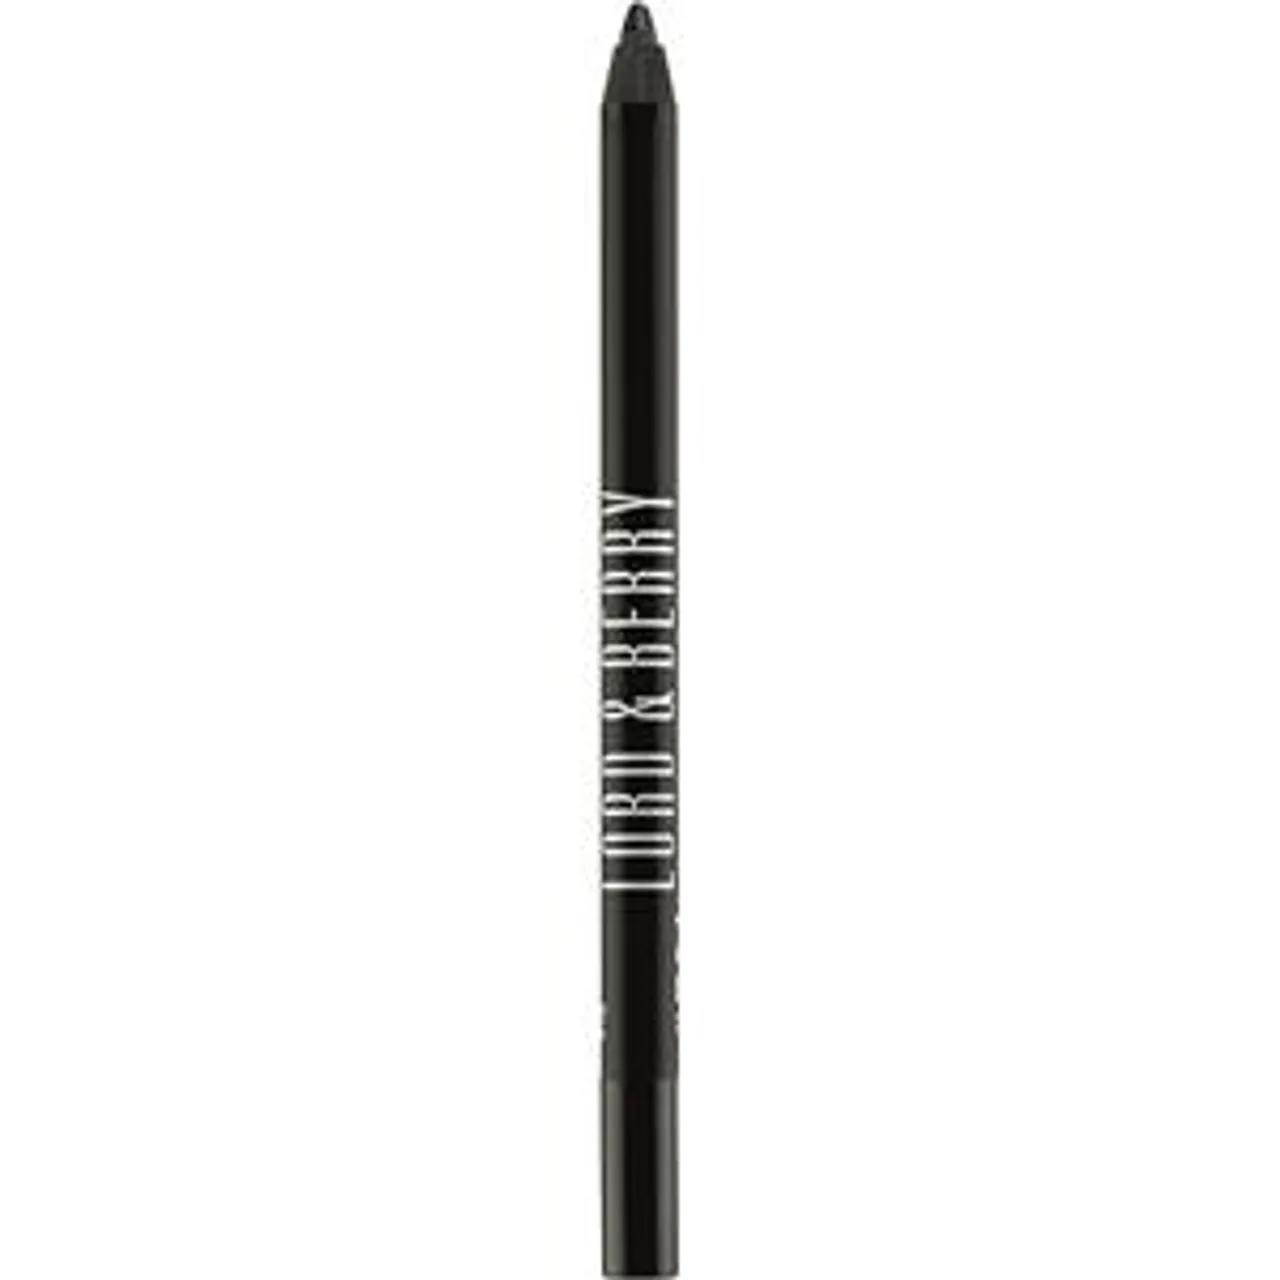 Lord & Berry Smudgeproof Eyeliner 2 1 g